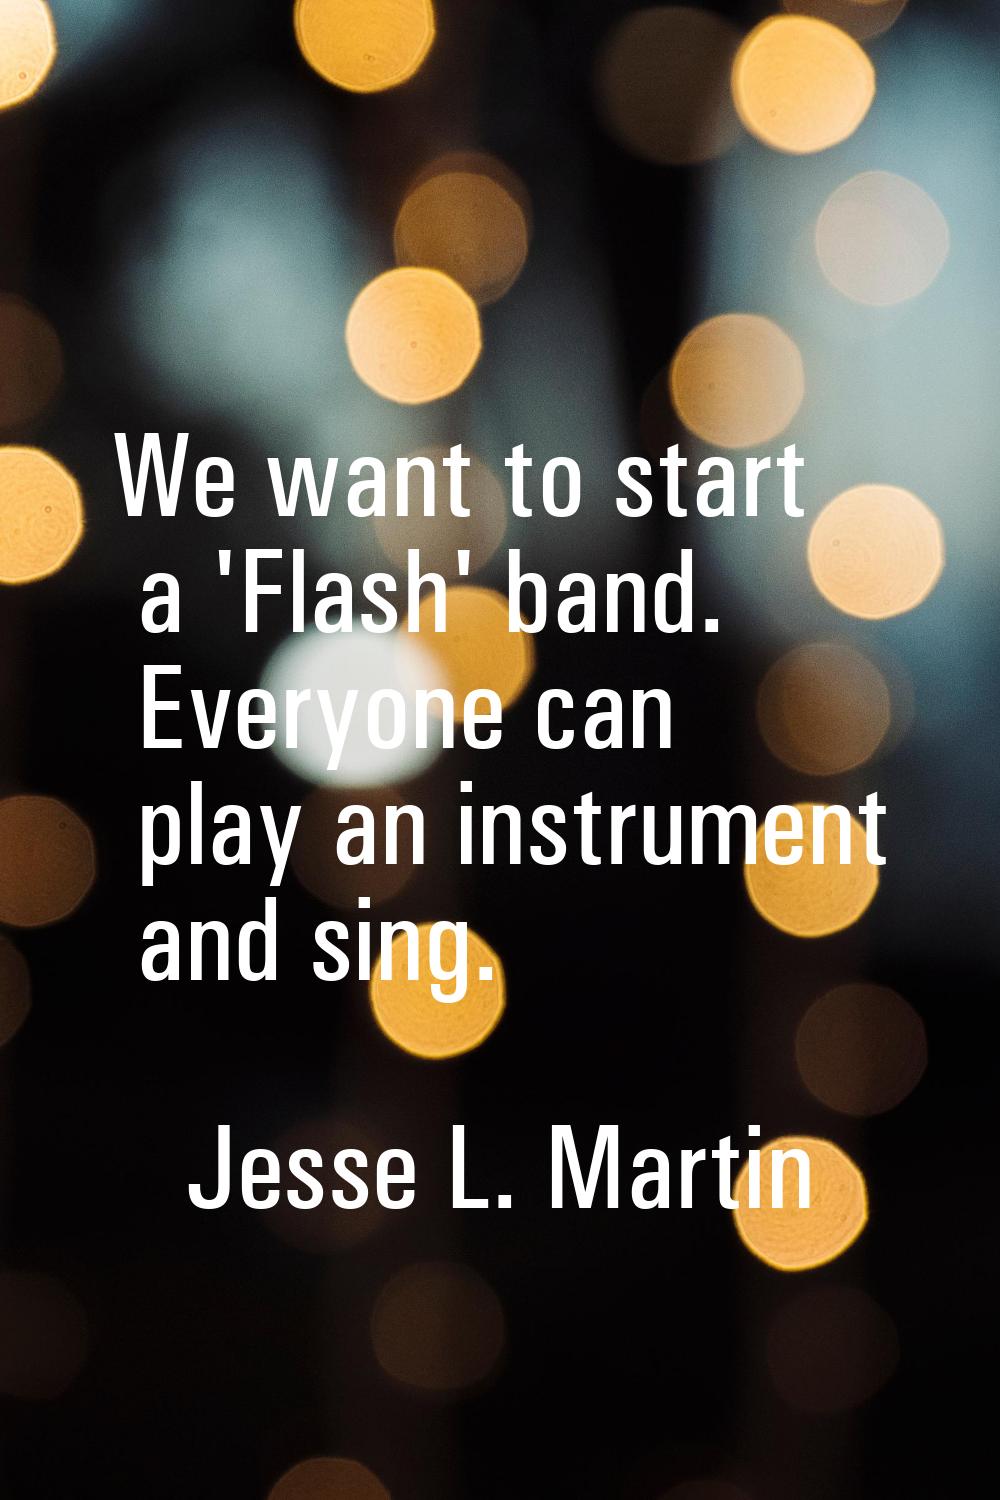 We want to start a 'Flash' band. Everyone can play an instrument and sing.